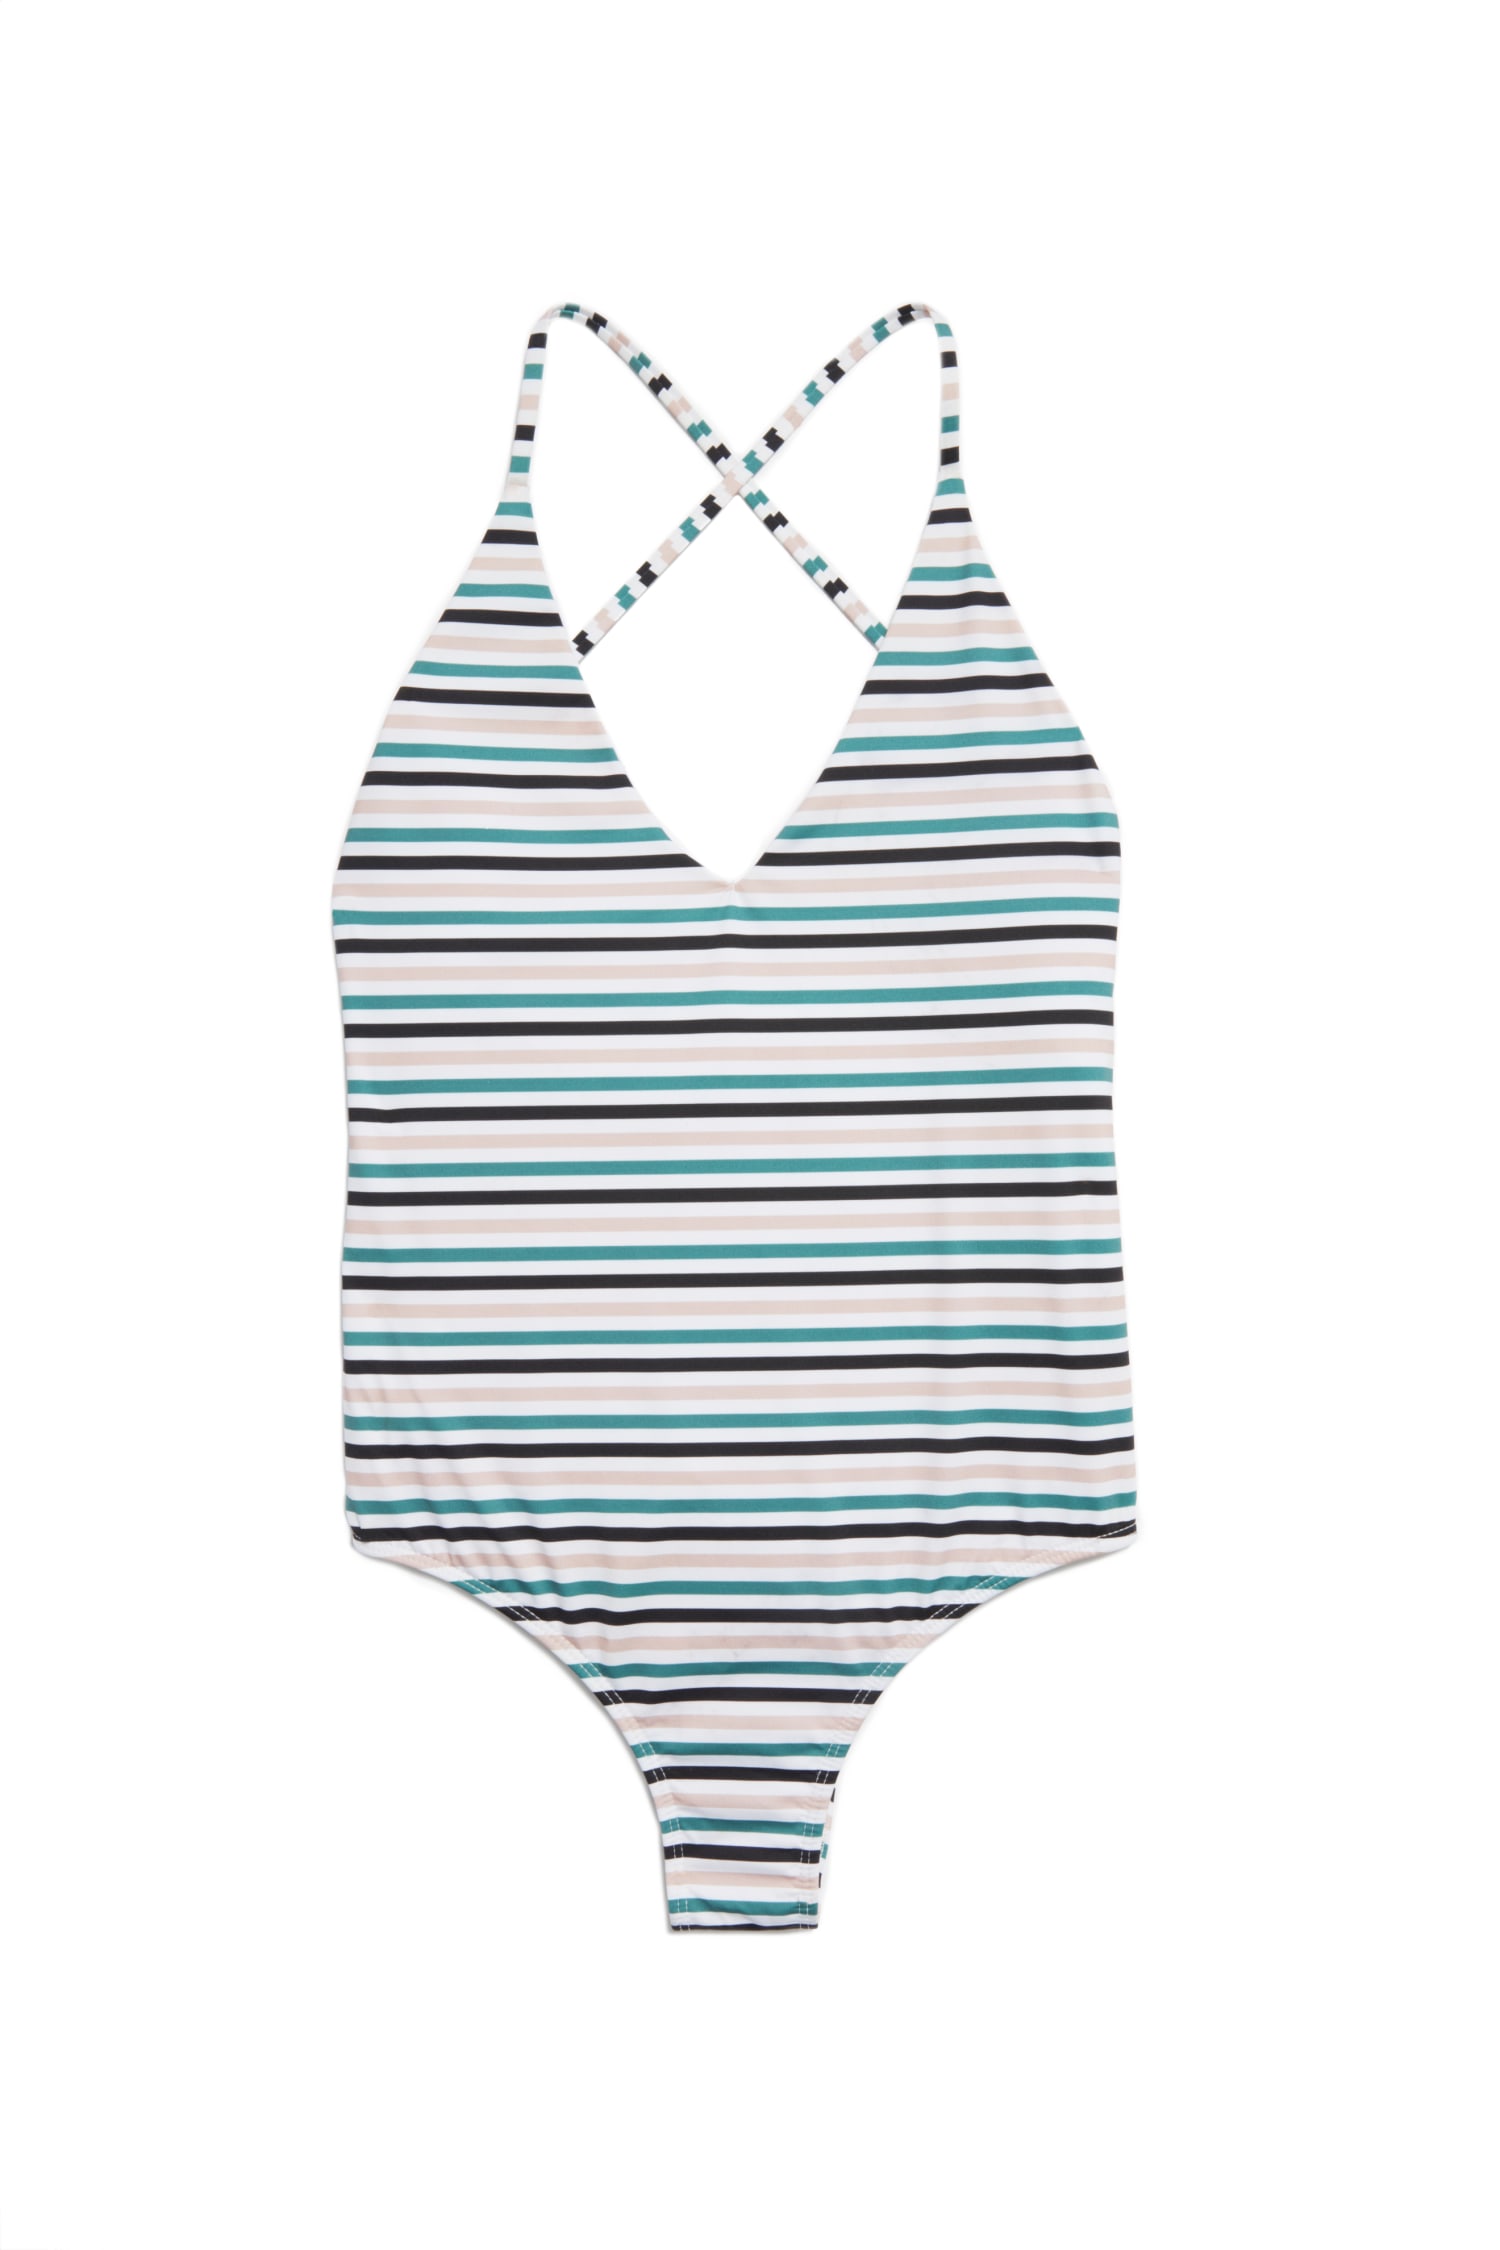 ralph lauren bathing suits lord and taylor